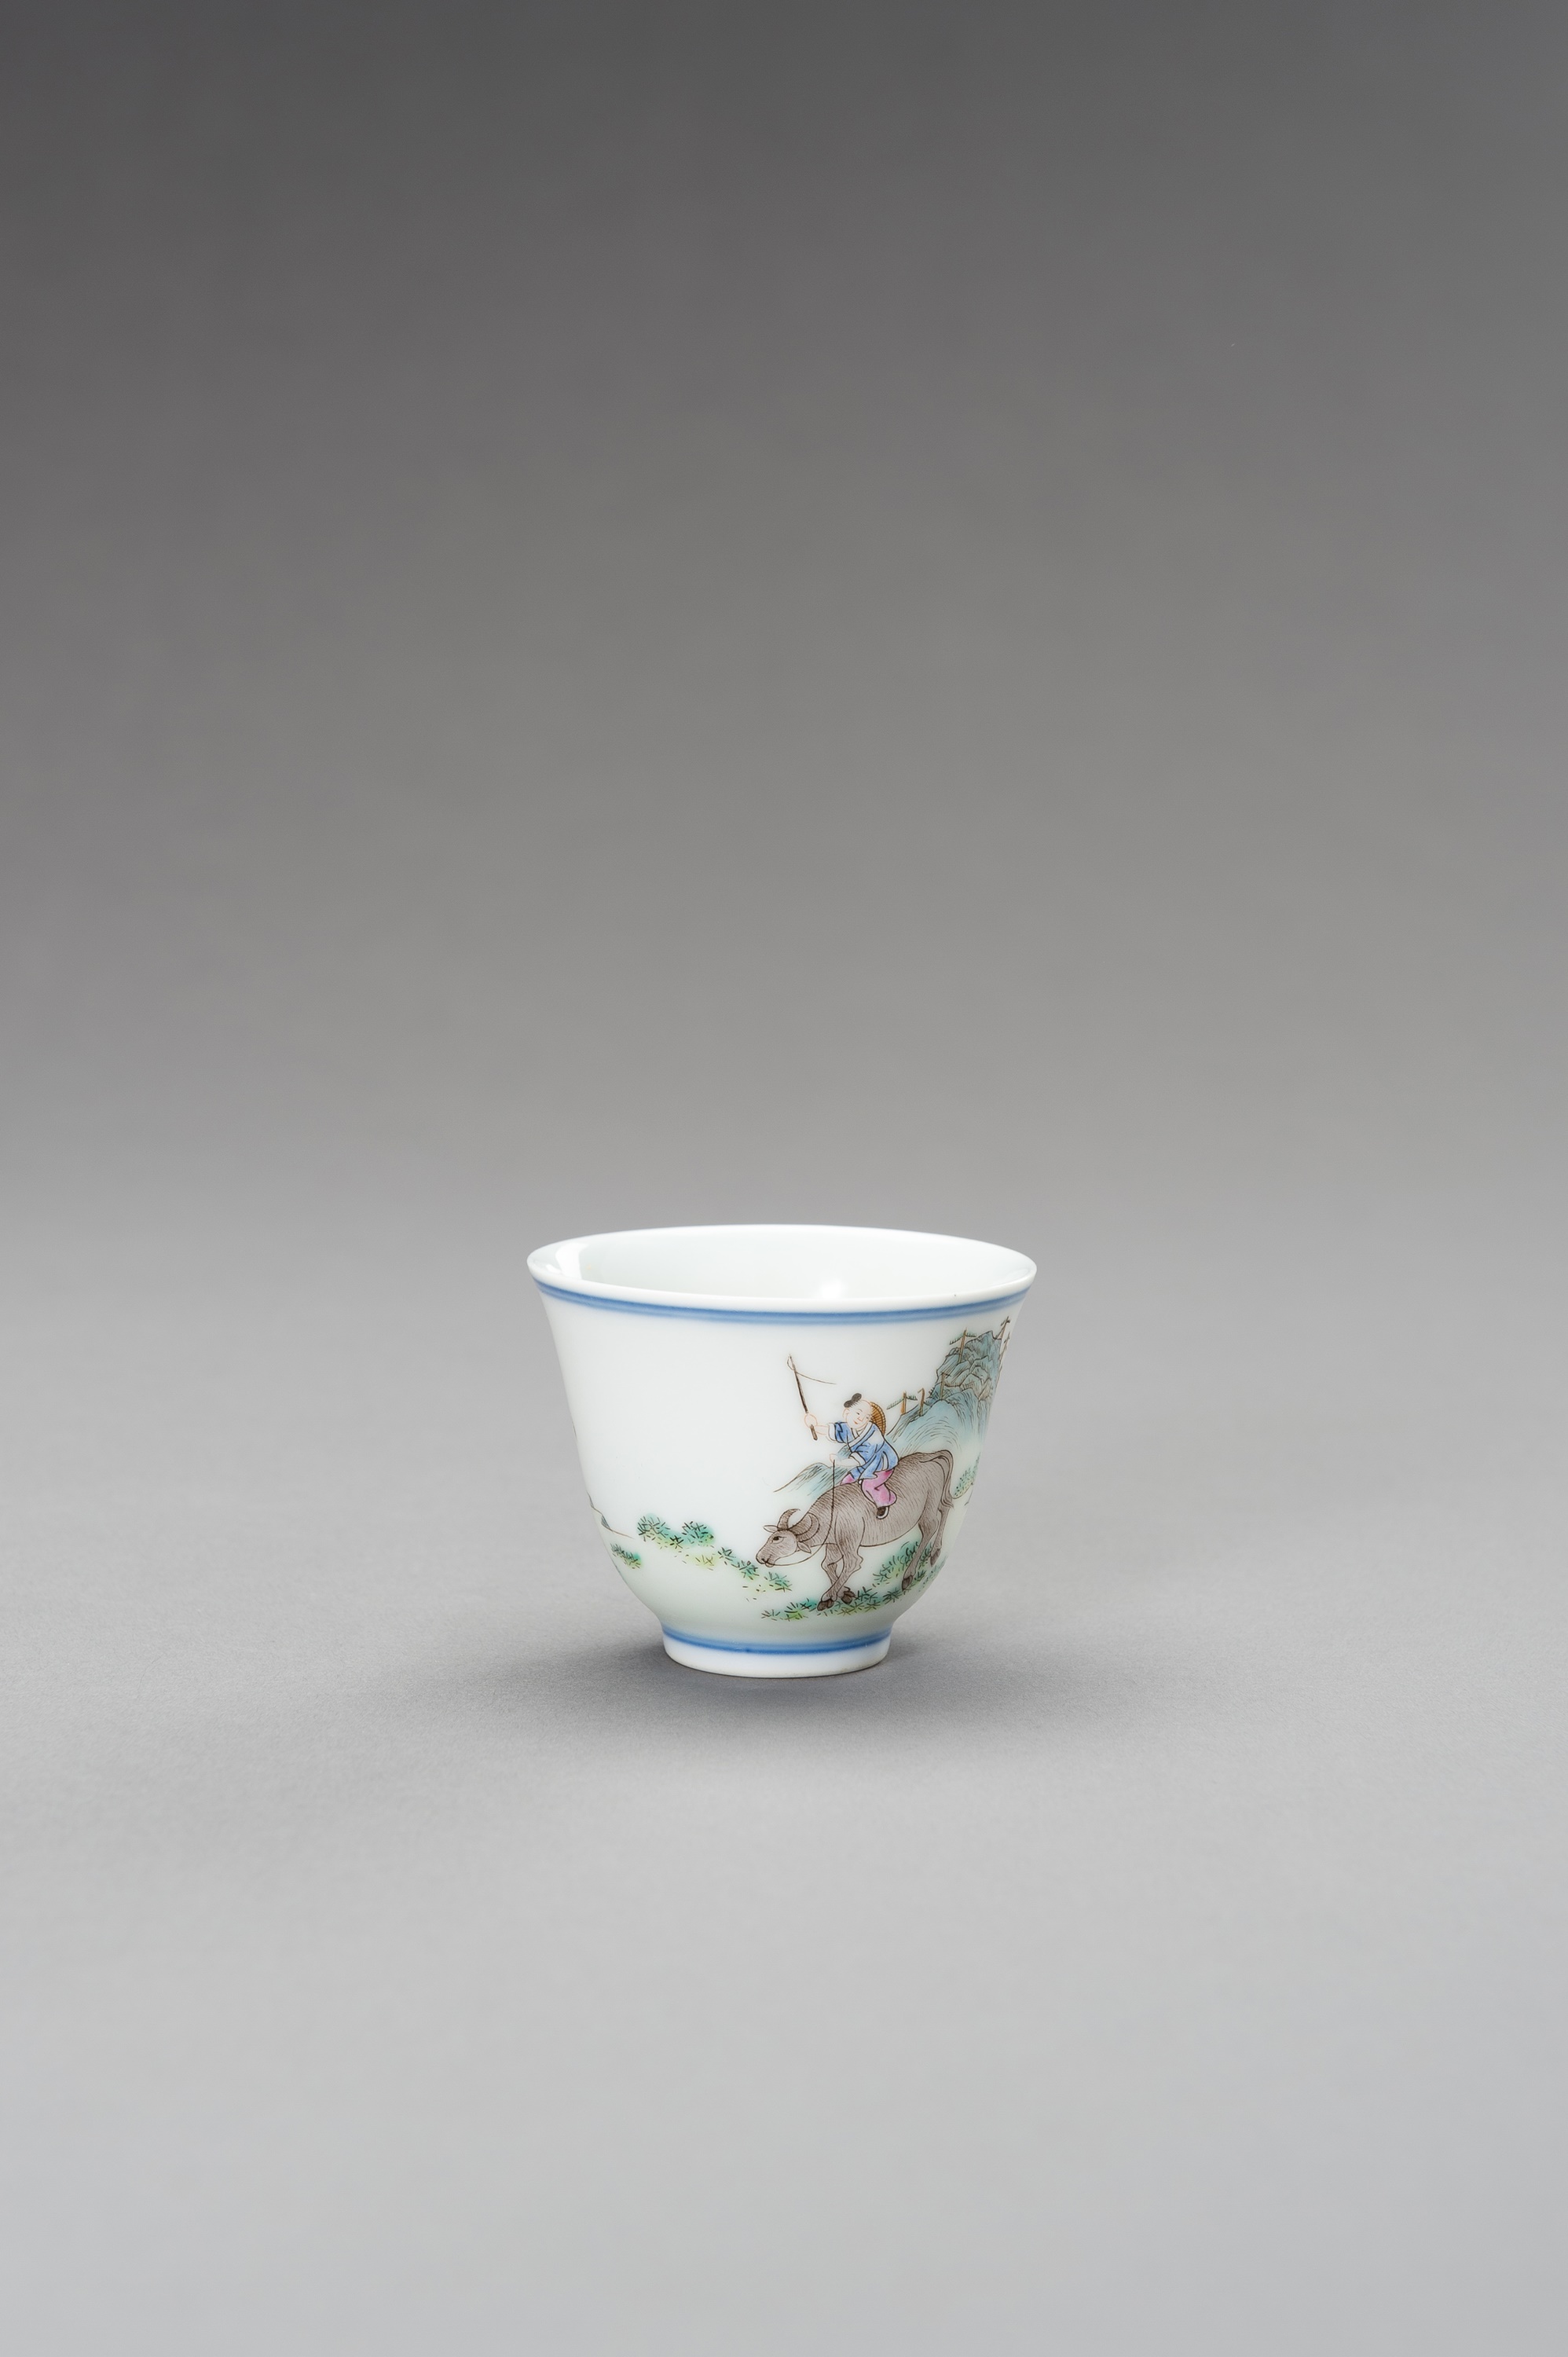 A 'BOY ON OX' PORCELAIN CUP, QING - Image 4 of 10